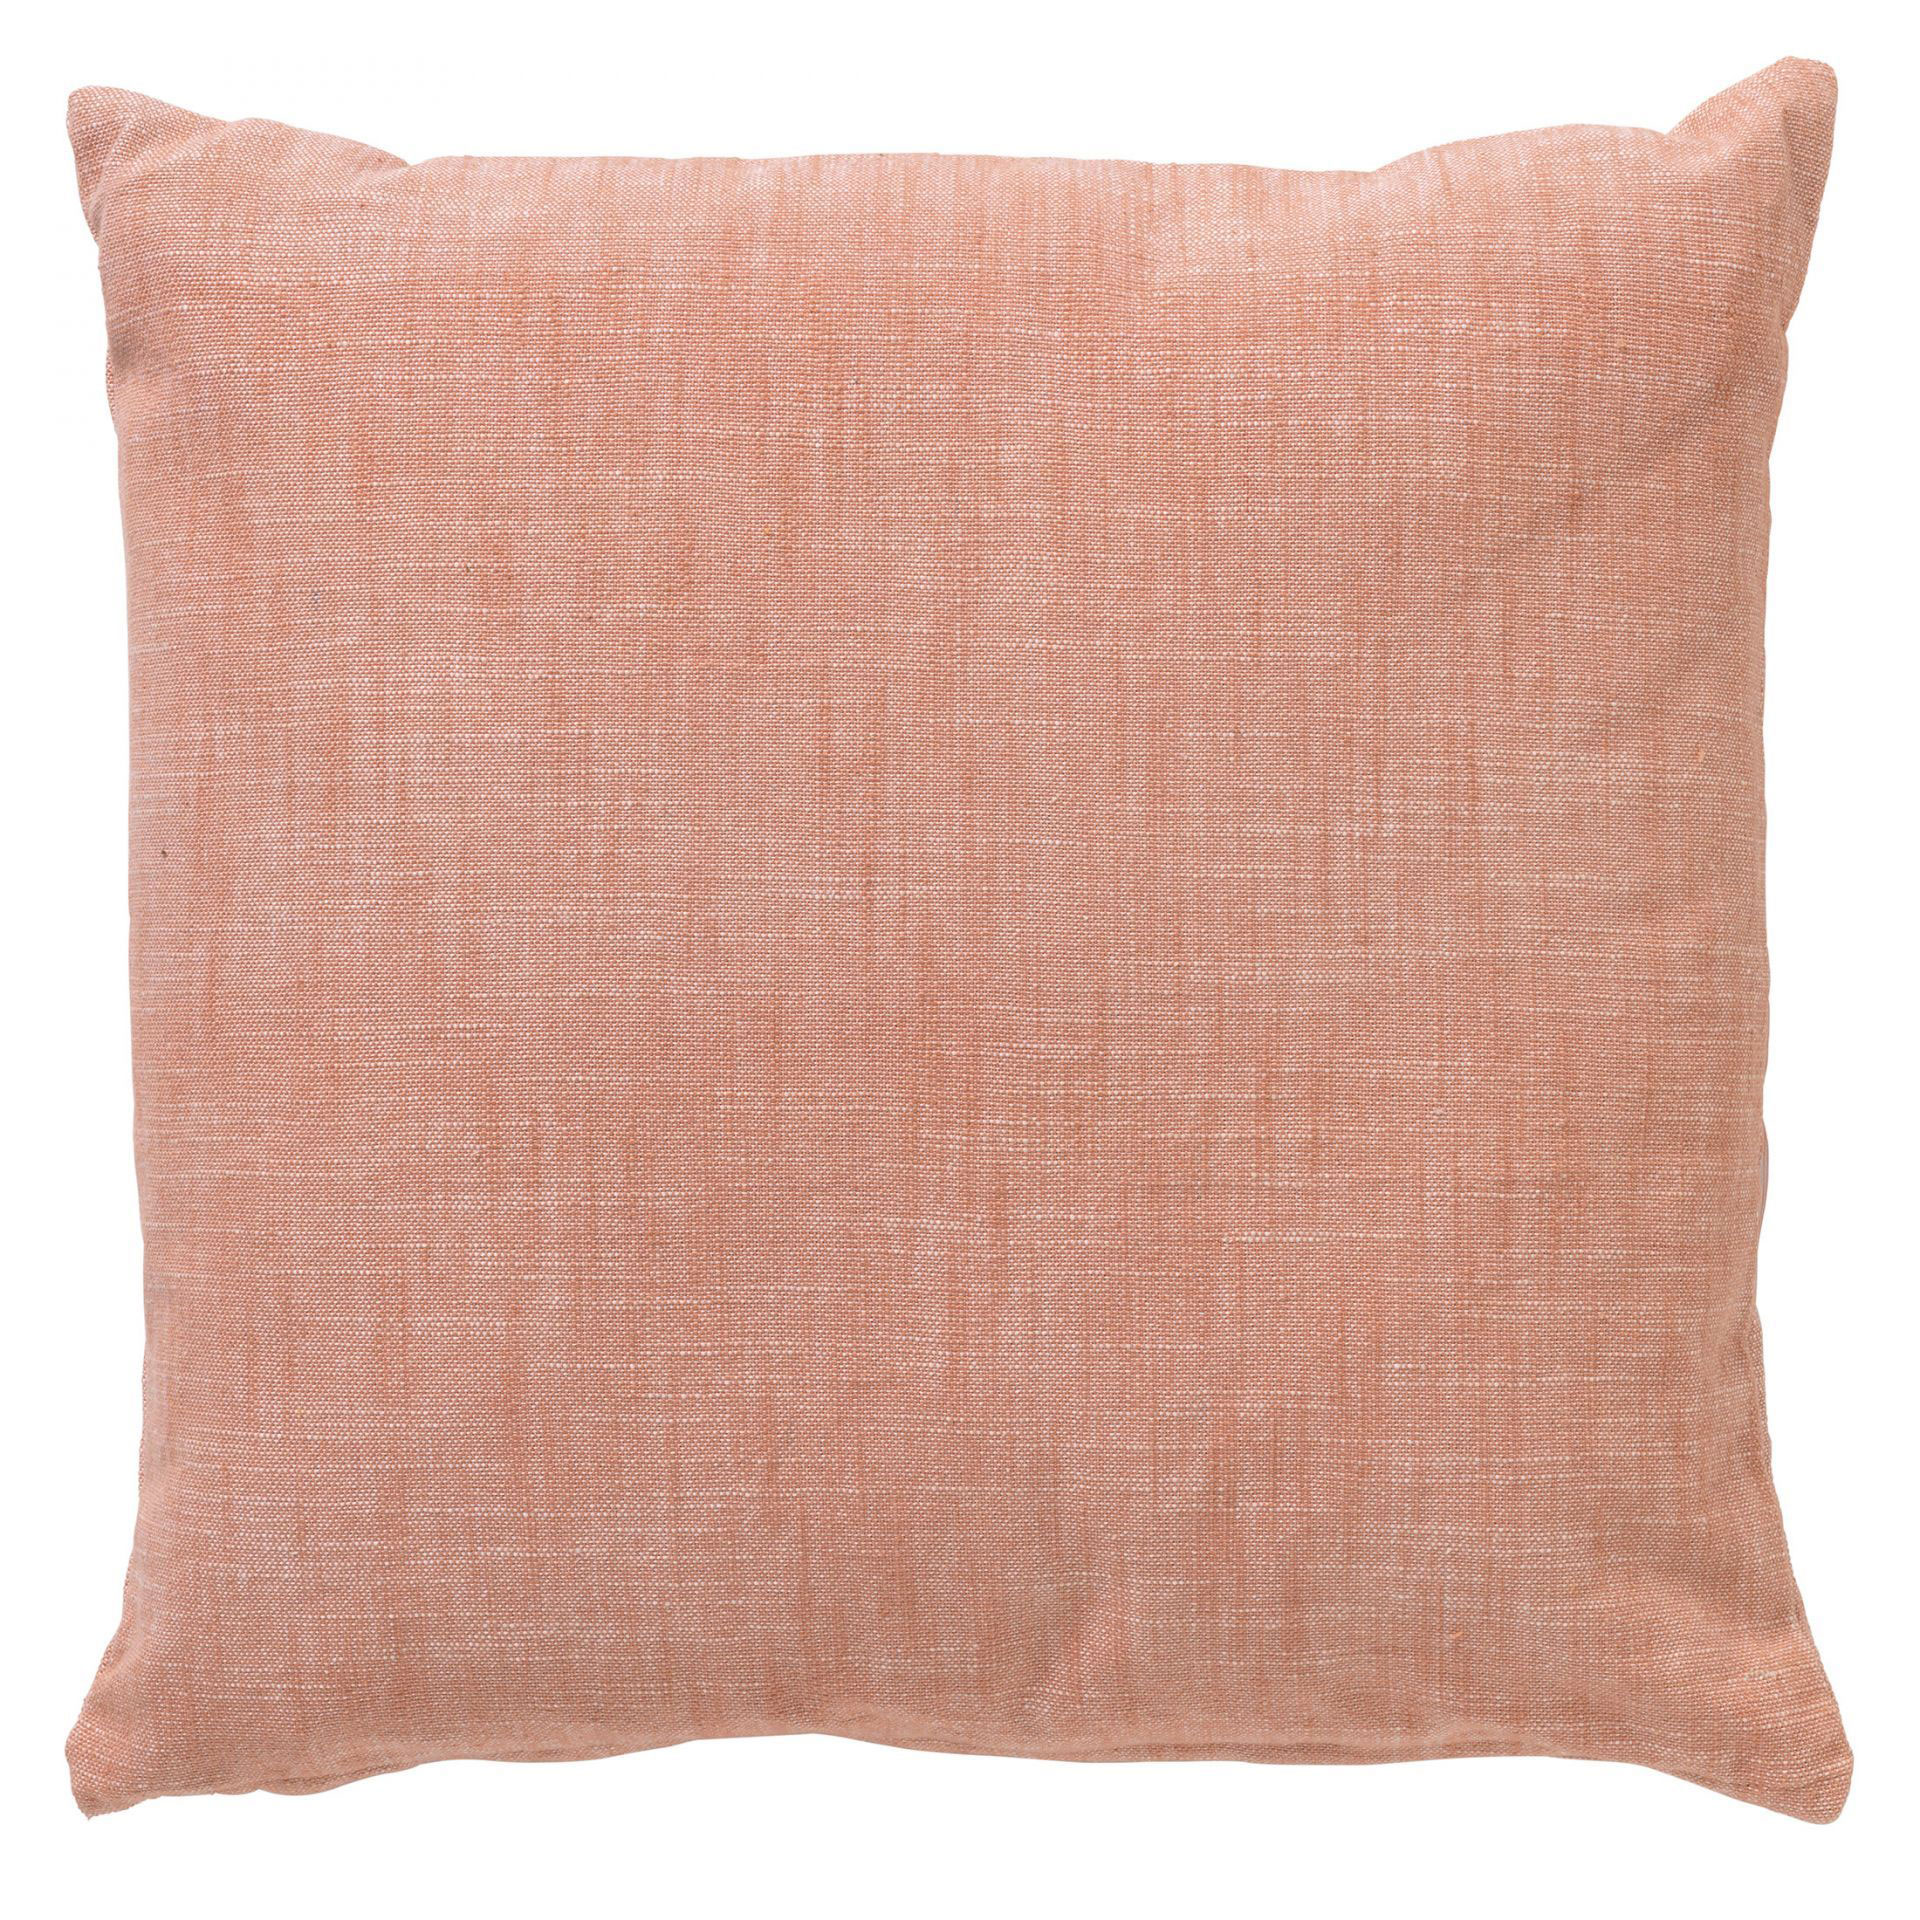 NATURA - Cushion 100% cotton 45x45 cm Muted Clay - pink